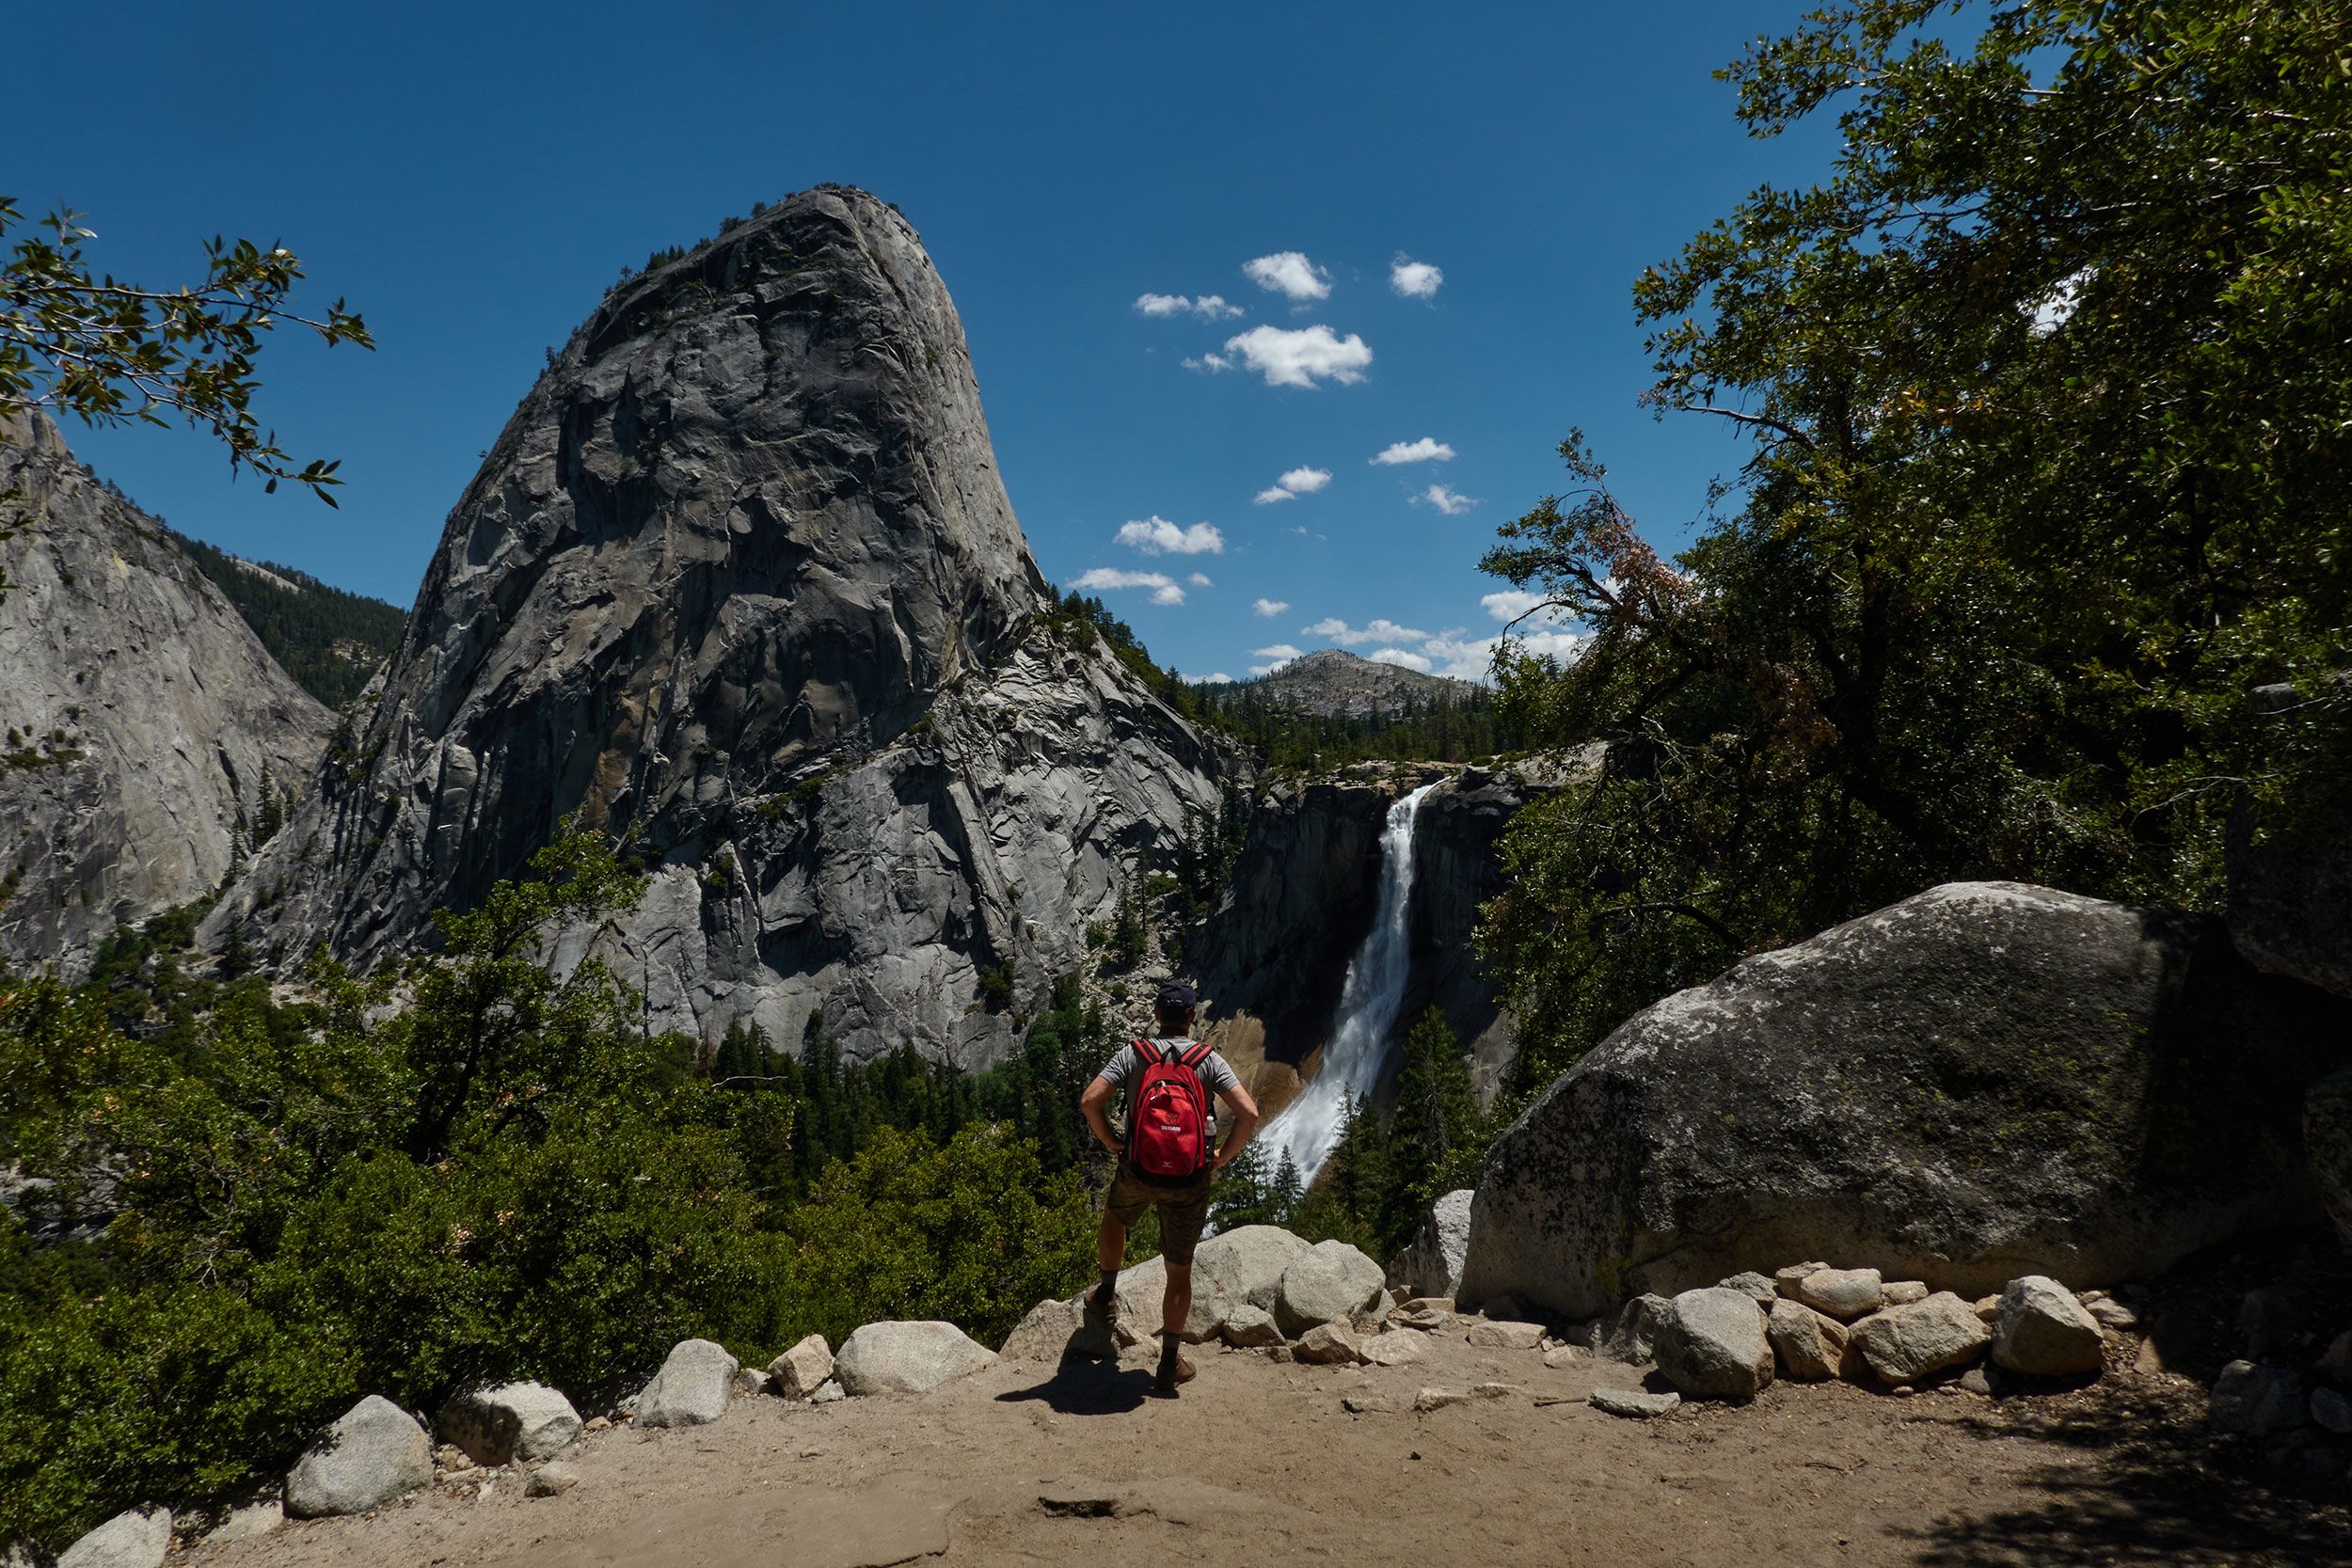 Top 10 national parks for hiking: Yosemite, Olympic, Sequoia, Glacier